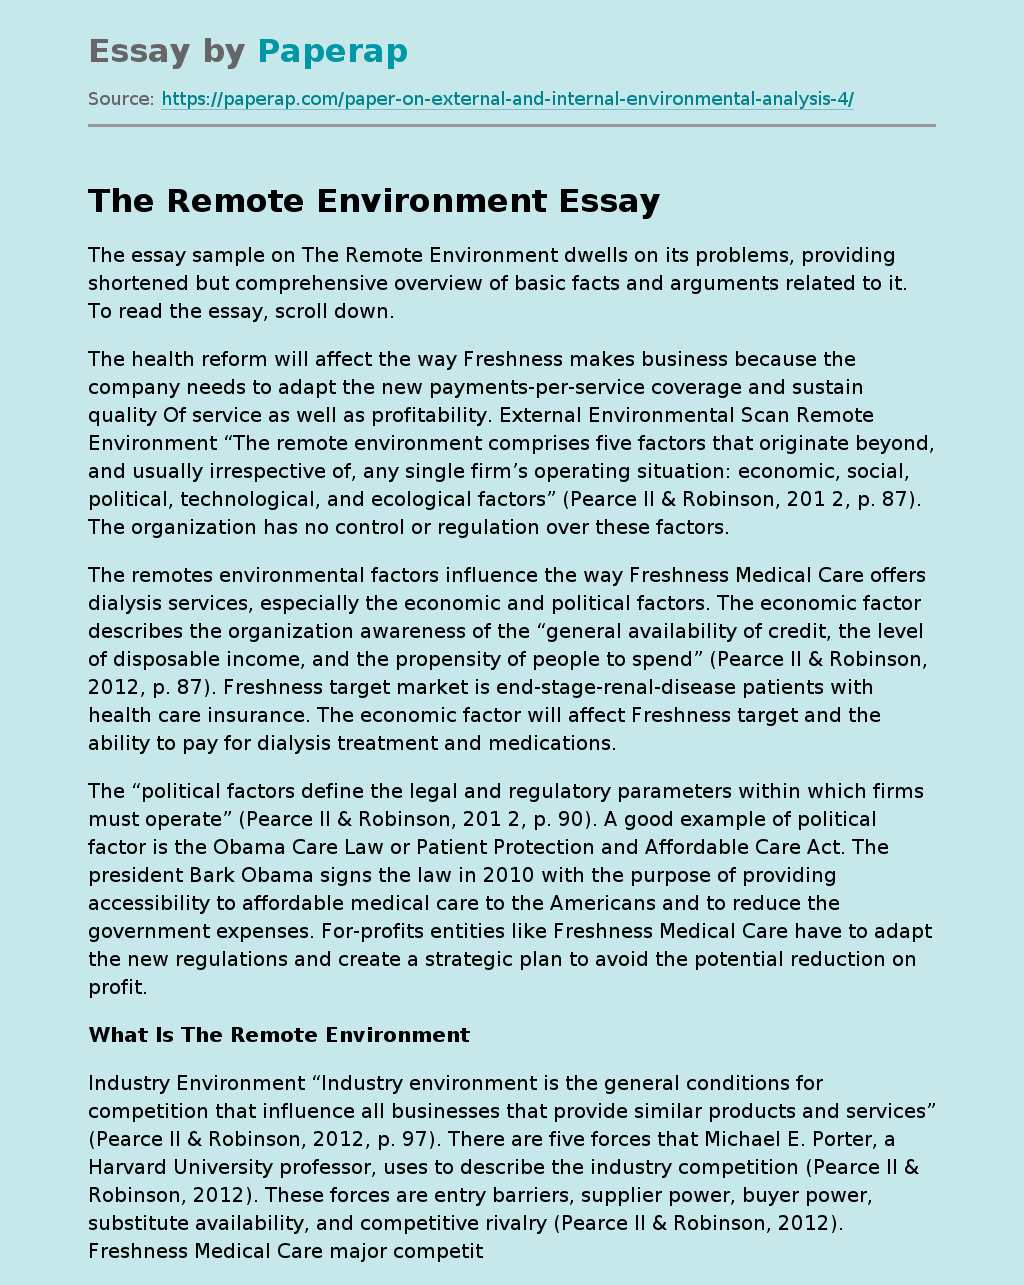 The Remote Environment